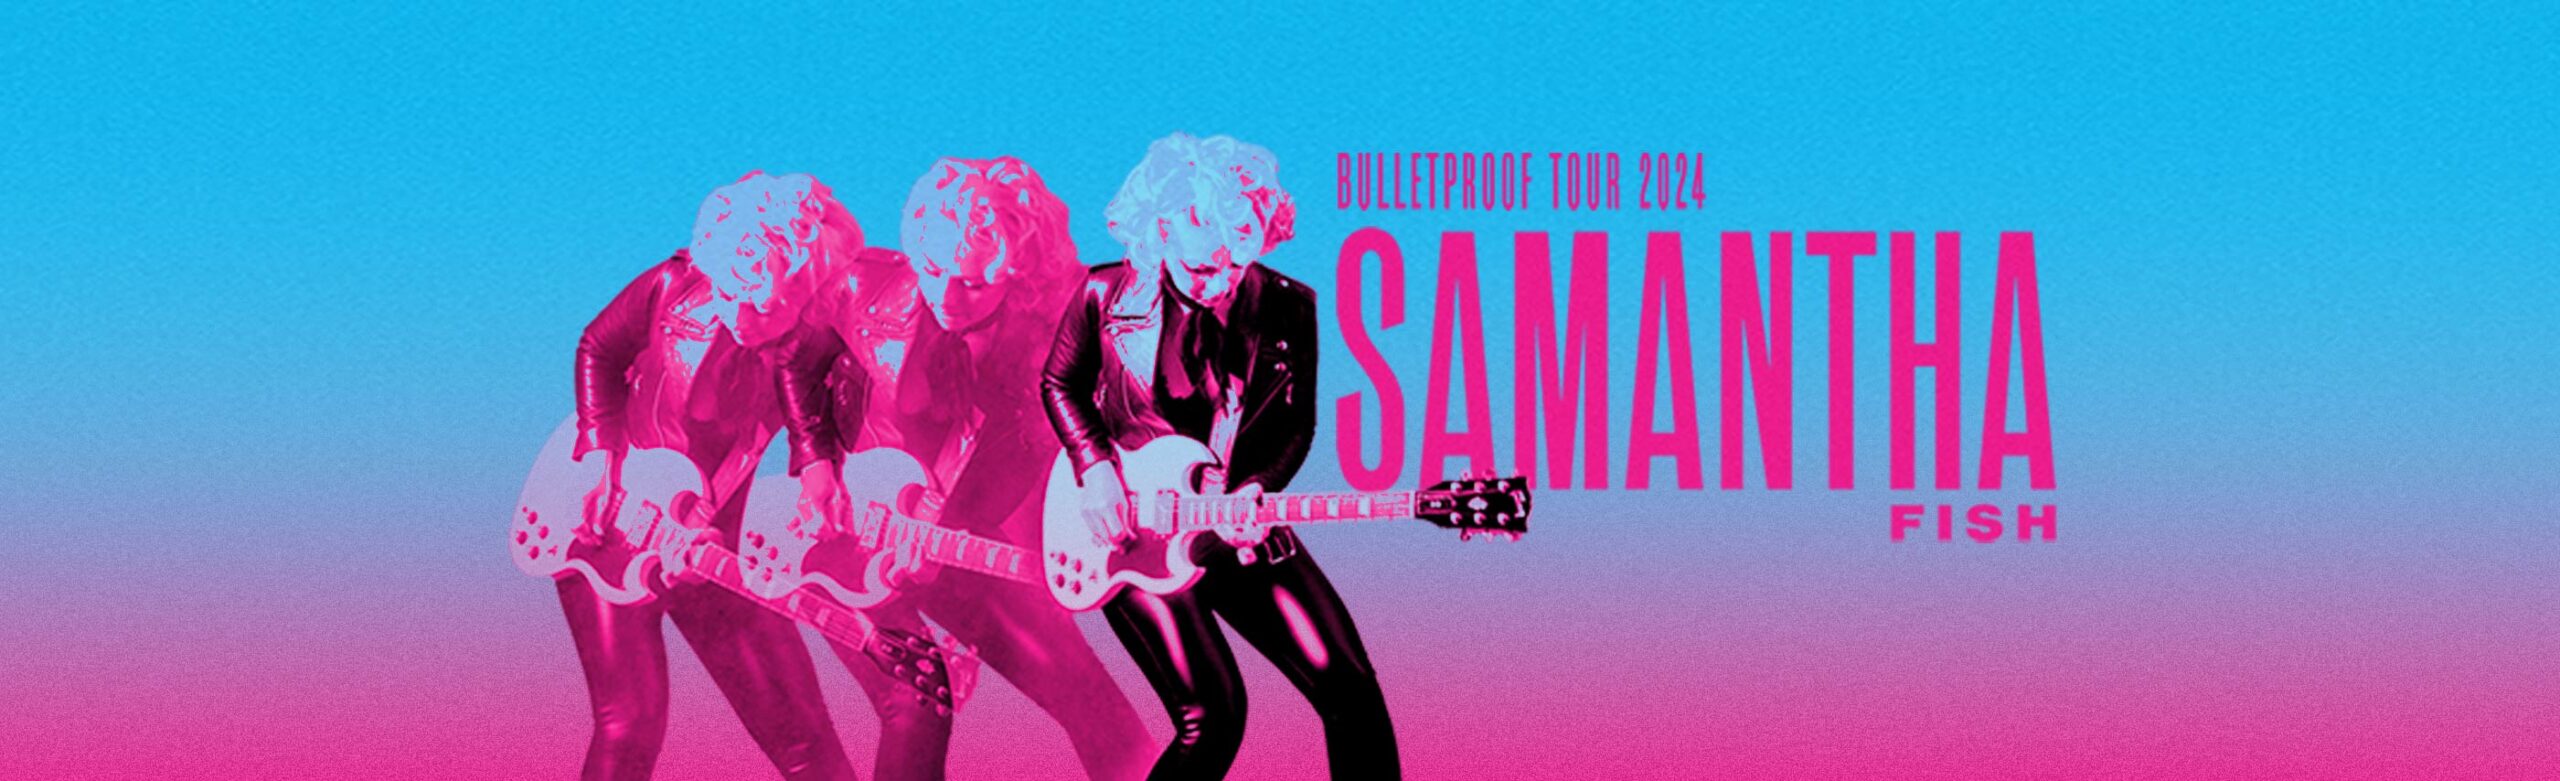 Samantha Fish Announces Bulletproof Tour Stop at The ELM with Zac Schulze Gang Image